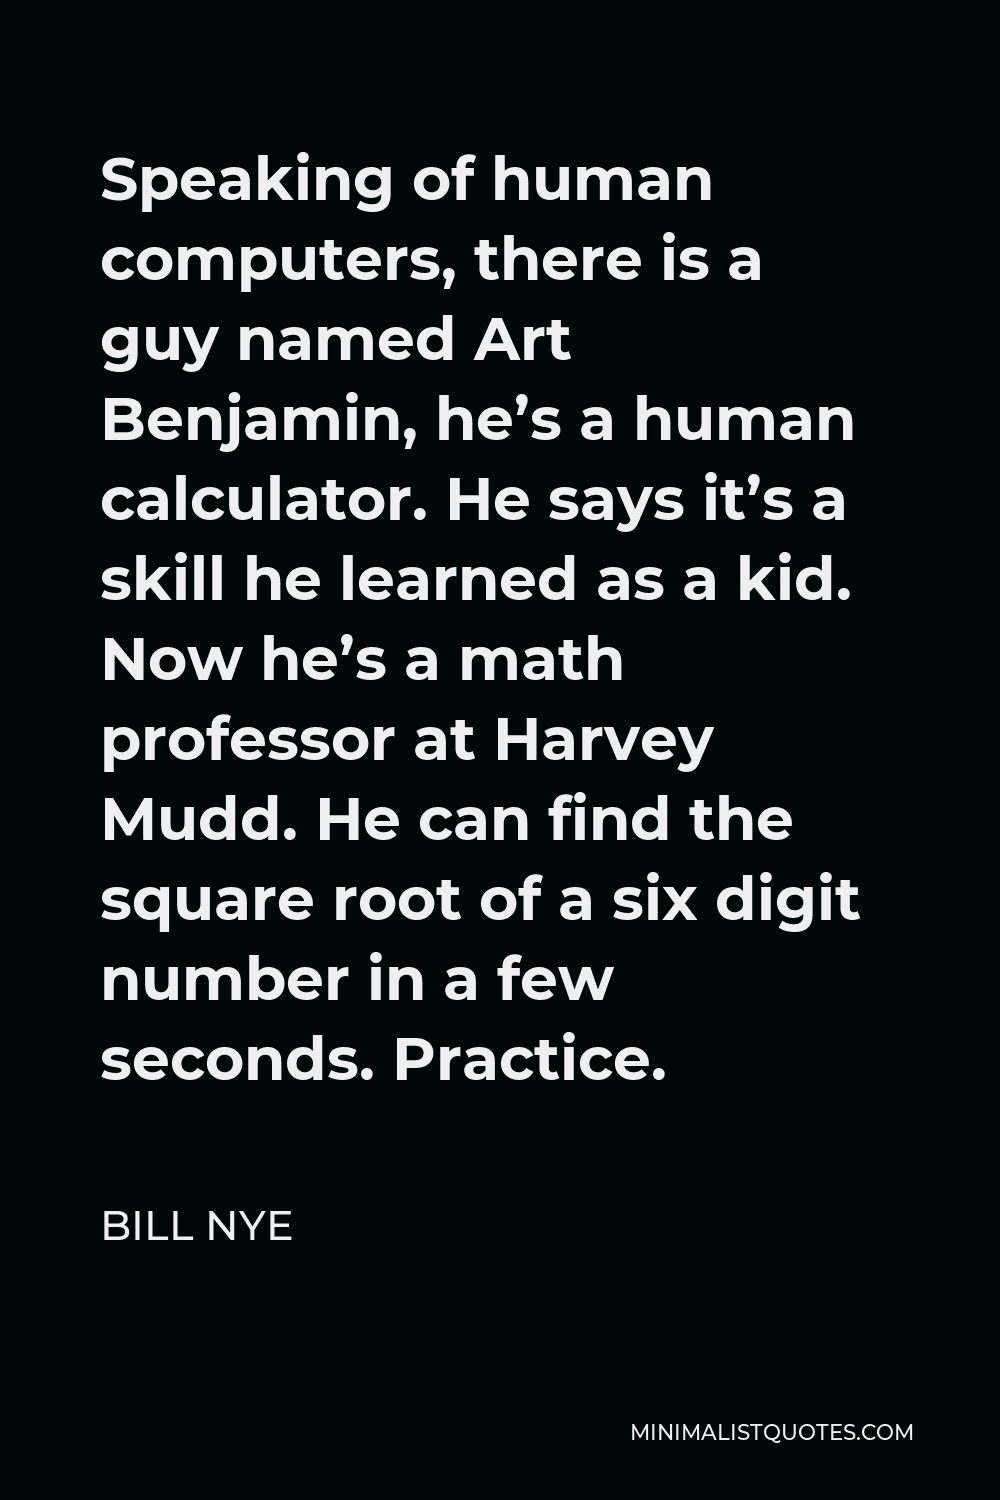 Bill Nye Quote - Speaking of human computers, there is a guy named Art Benjamin, he’s a human calculator. He says it’s a skill he learned as a kid. Now he’s a math professor at Harvey Mudd. He can find the square root of a six digit number in a few seconds. Practice.